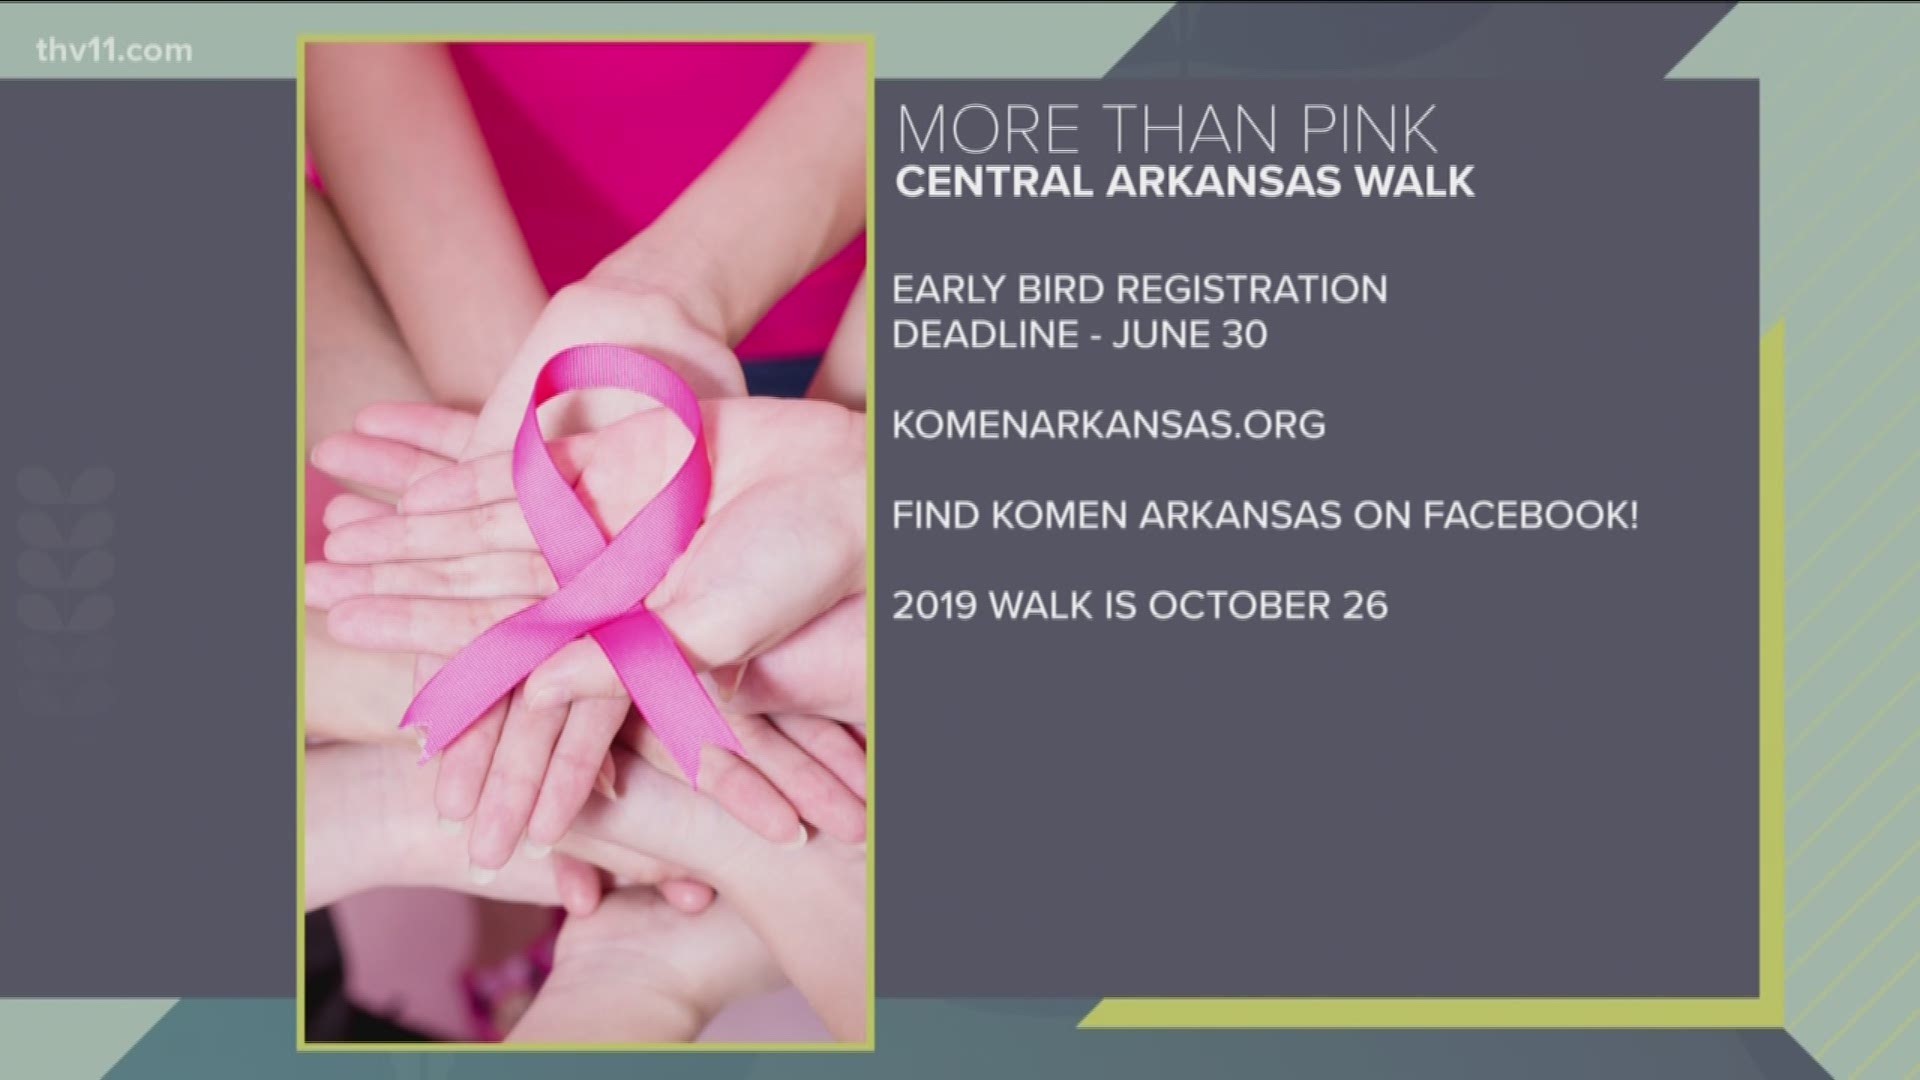 Lindsey Gray and Aimee Shelby talk about More than Pink Walk on October 26.